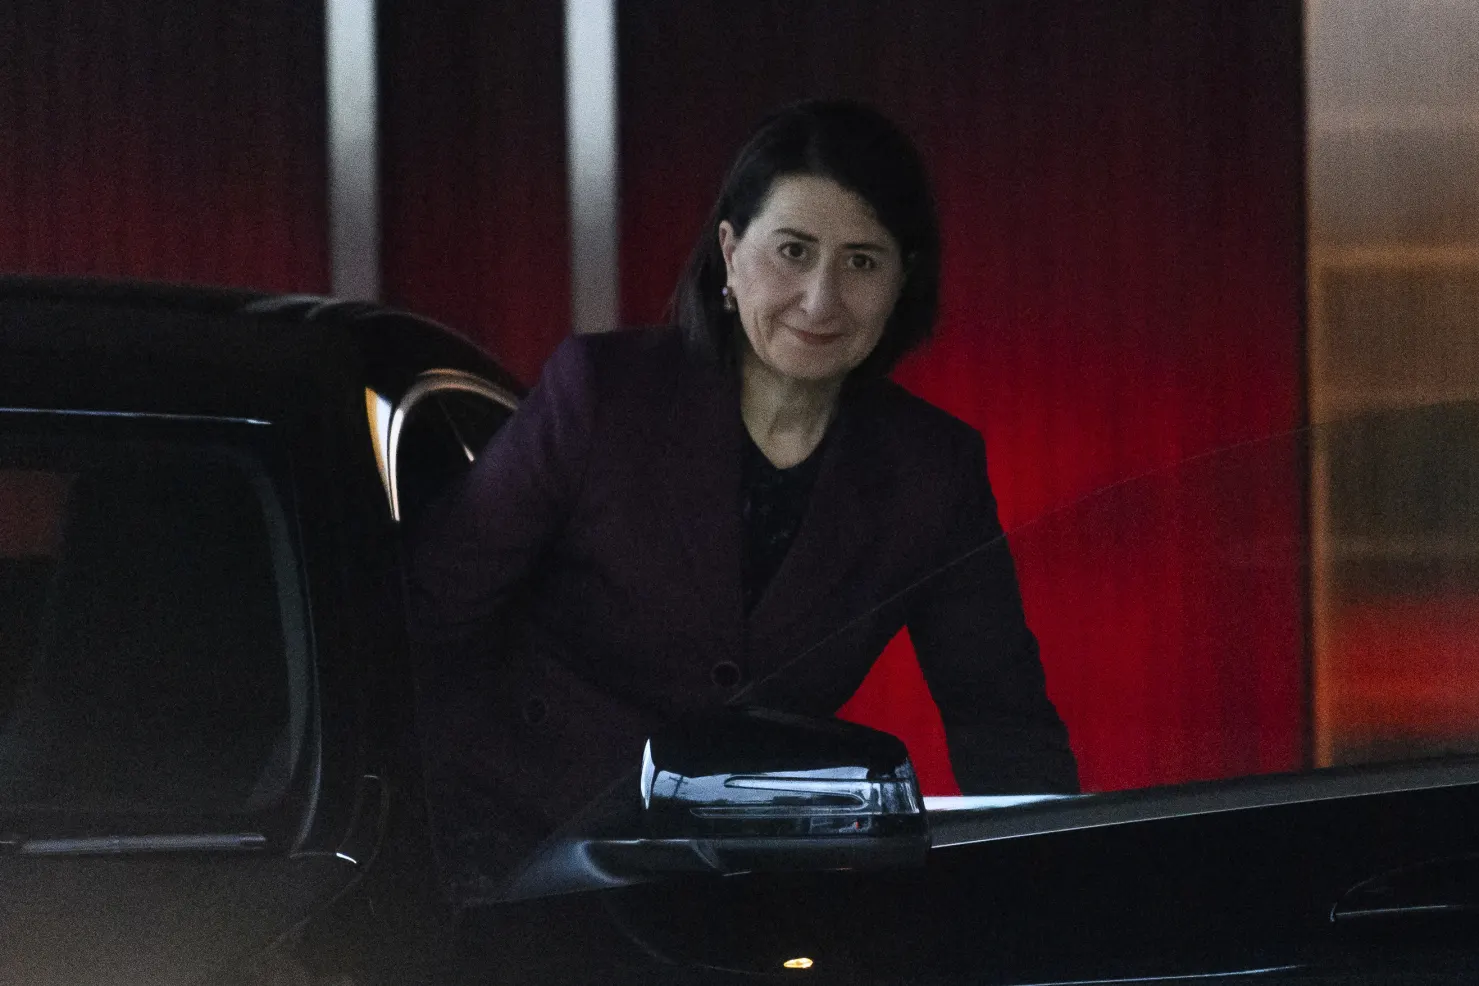 NSW ICAC found Gladys Berejiklian engaged in serious corrupt conduct